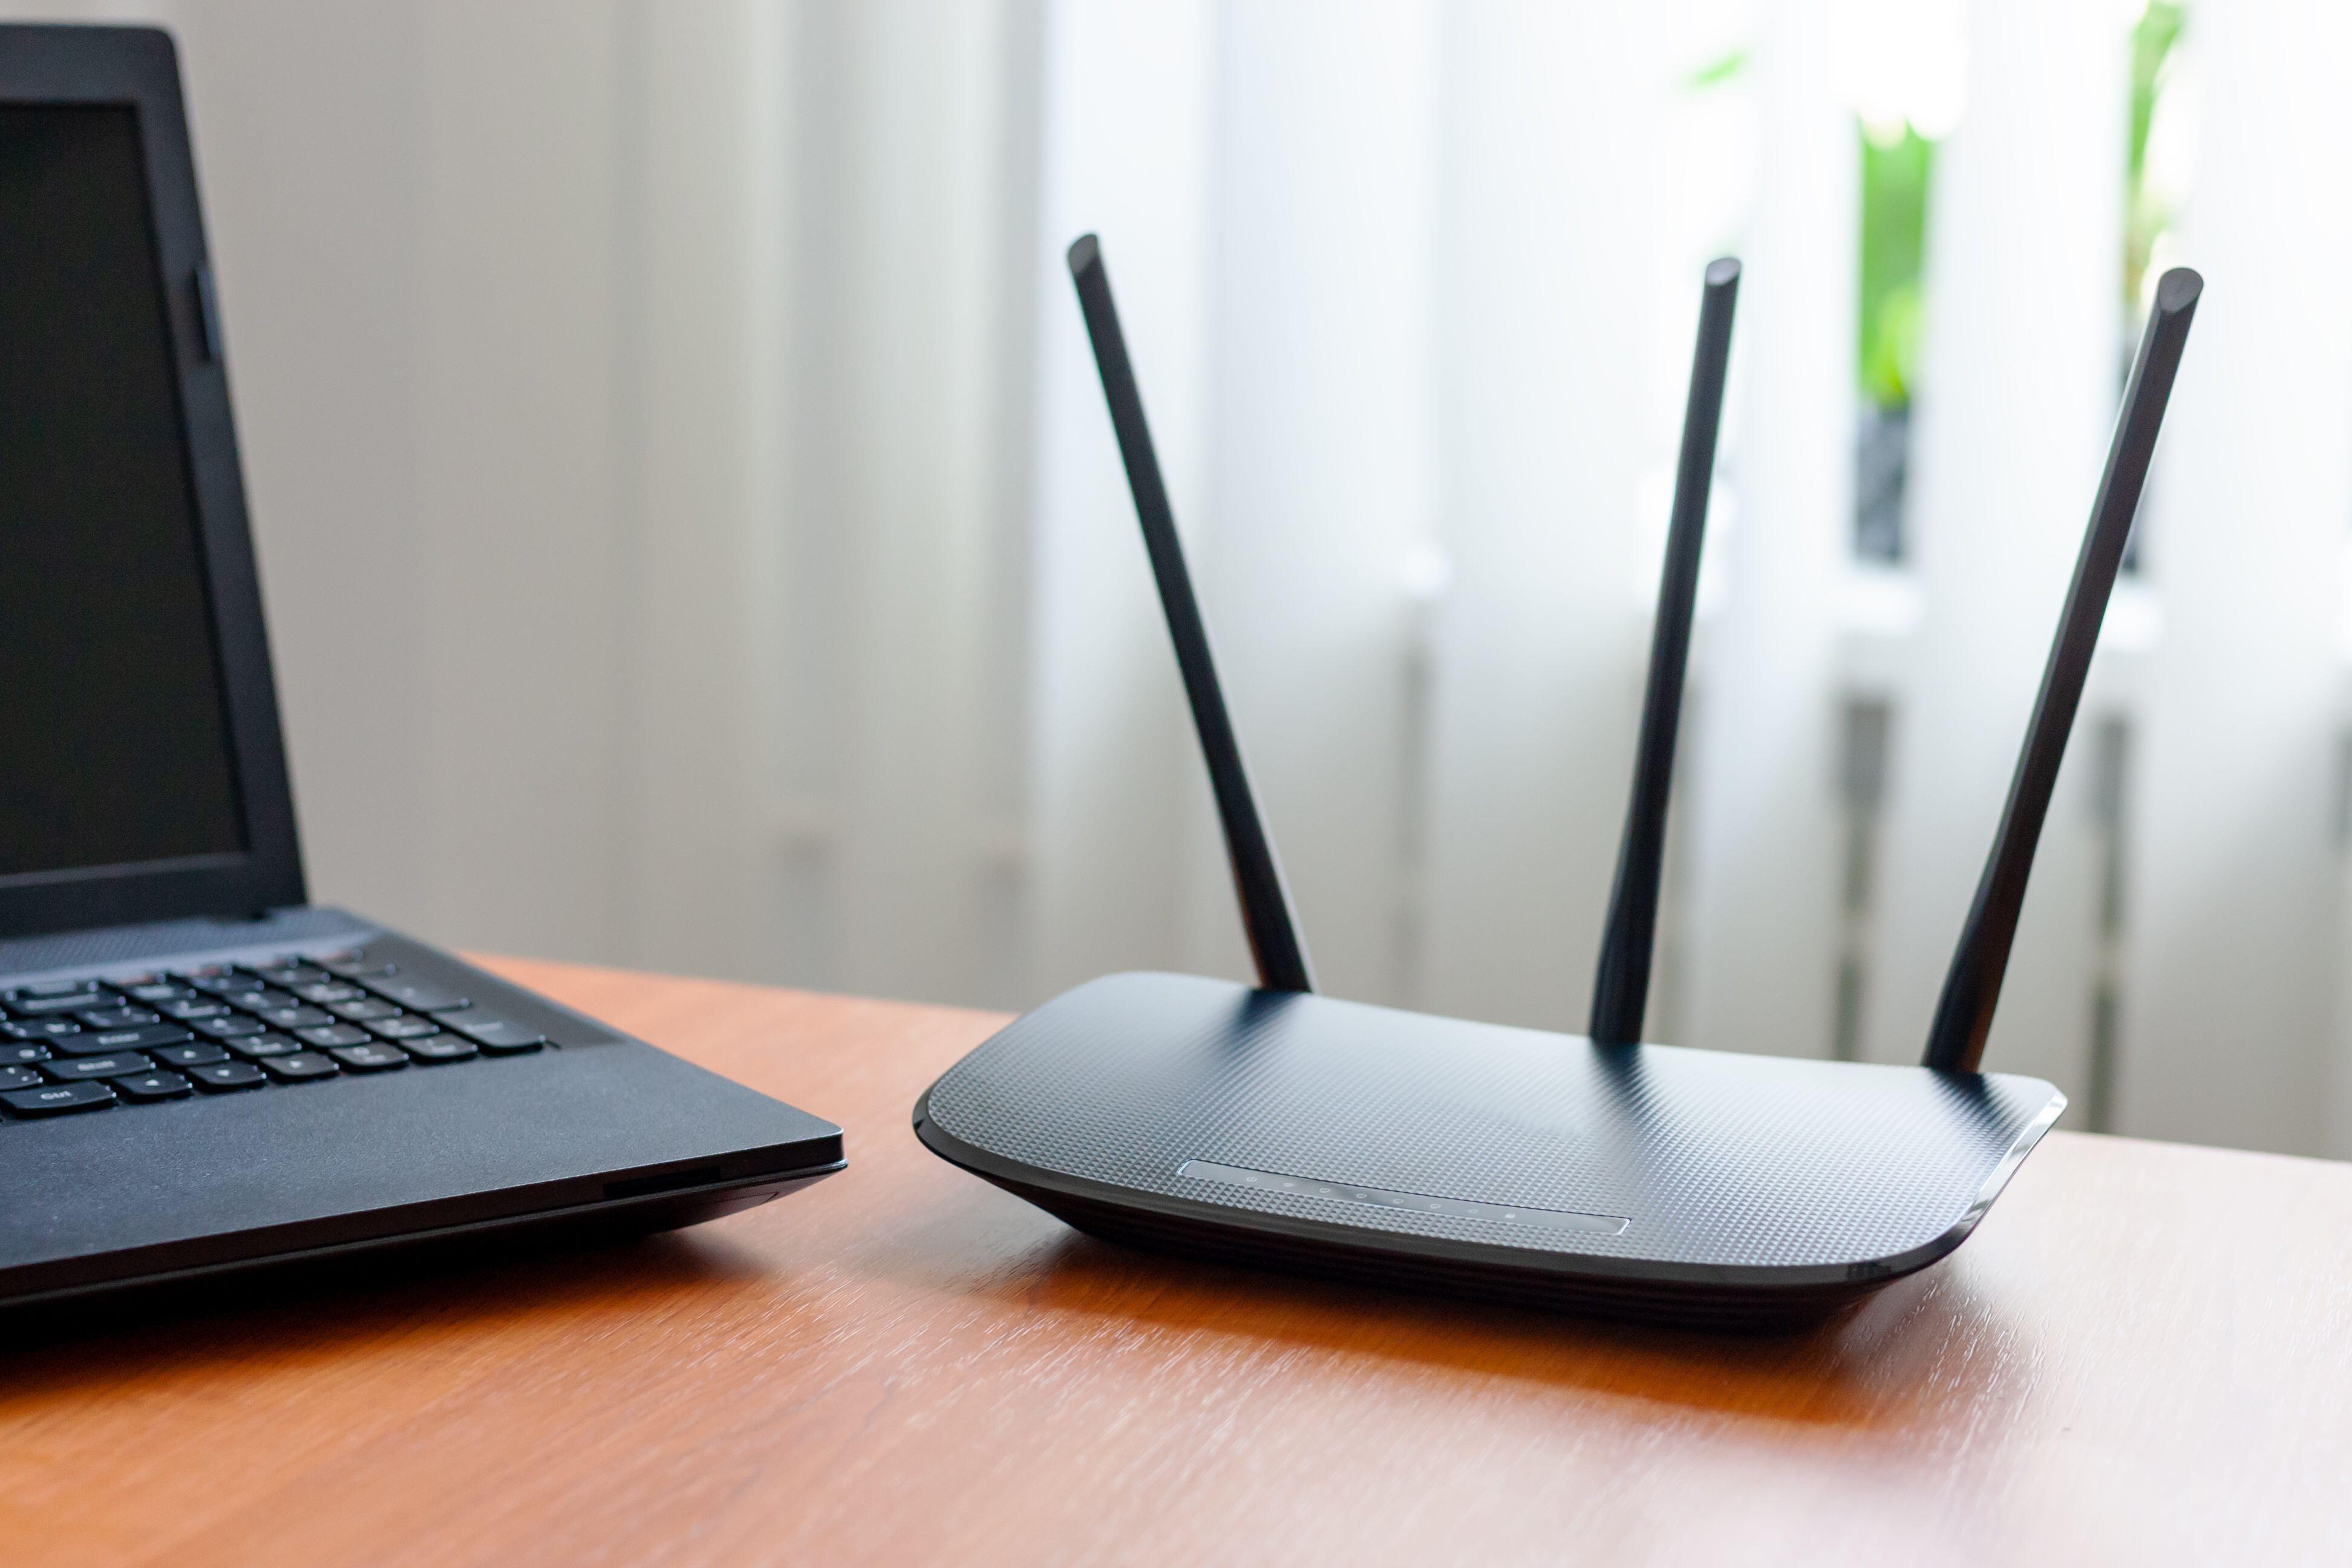 Wi-Fi users have been urged to not make five security mistakes that can cost them